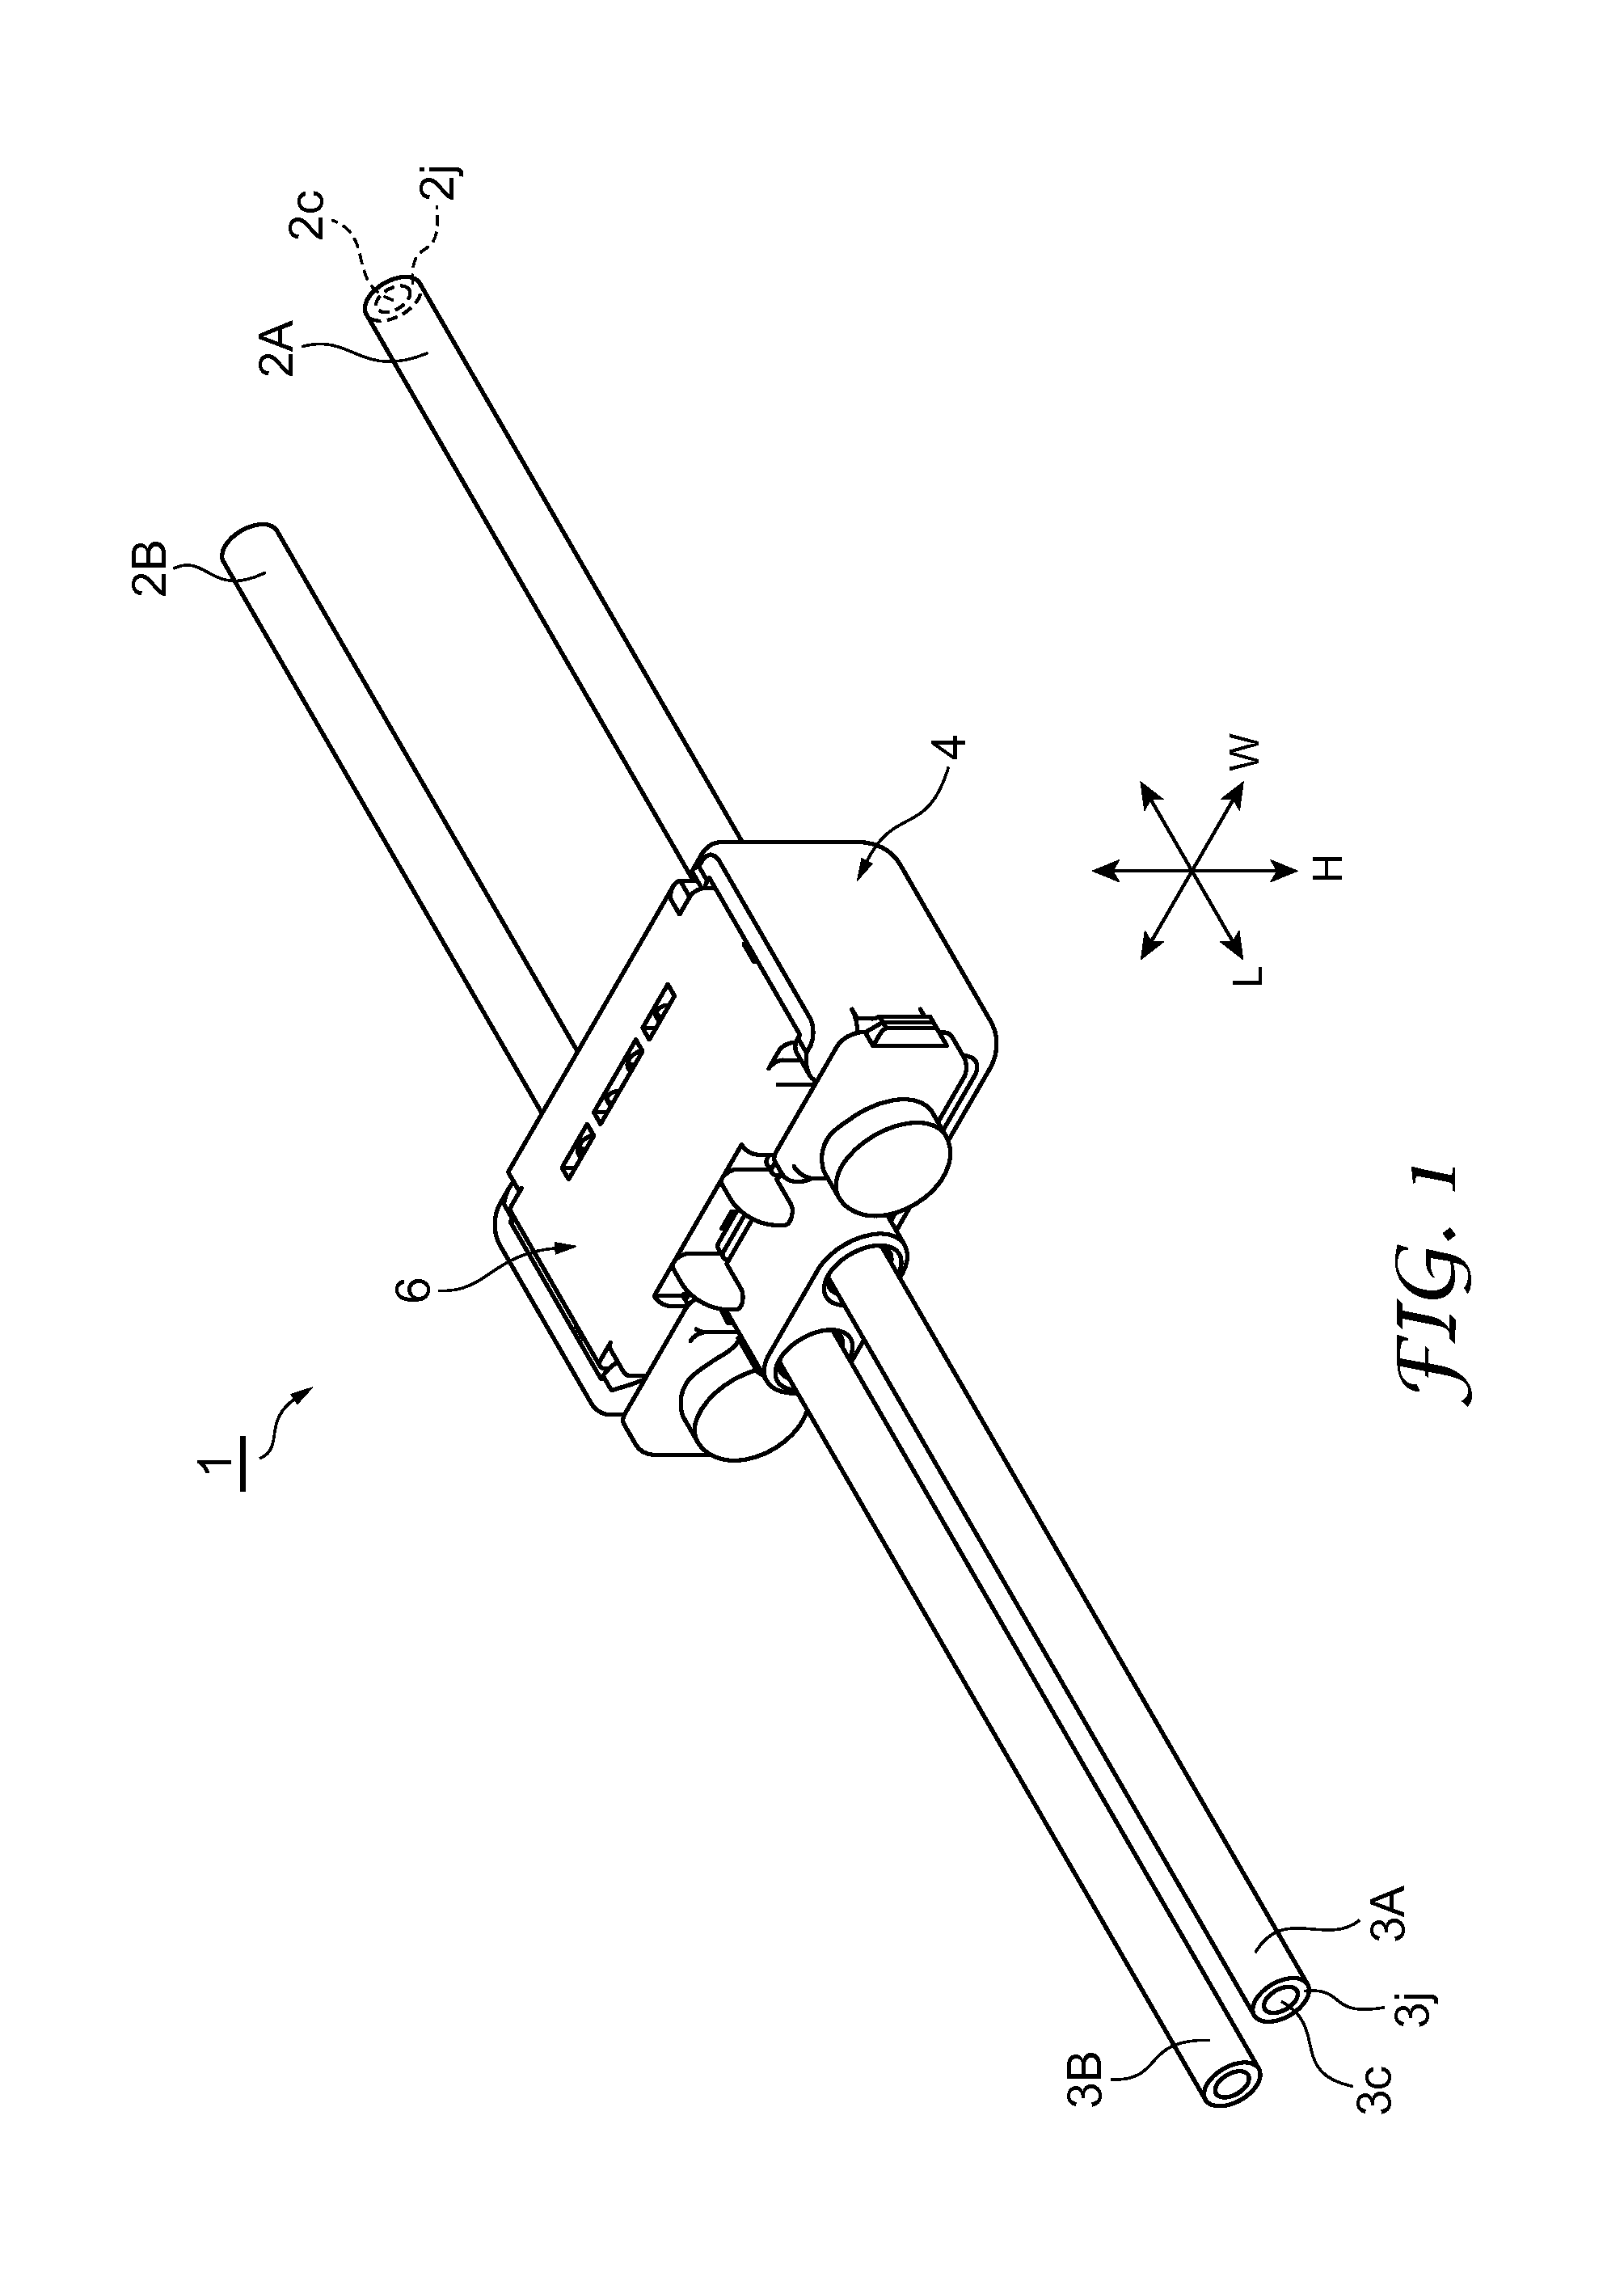 Wire connector having a wire holder with an abutting portion and a protecting portion